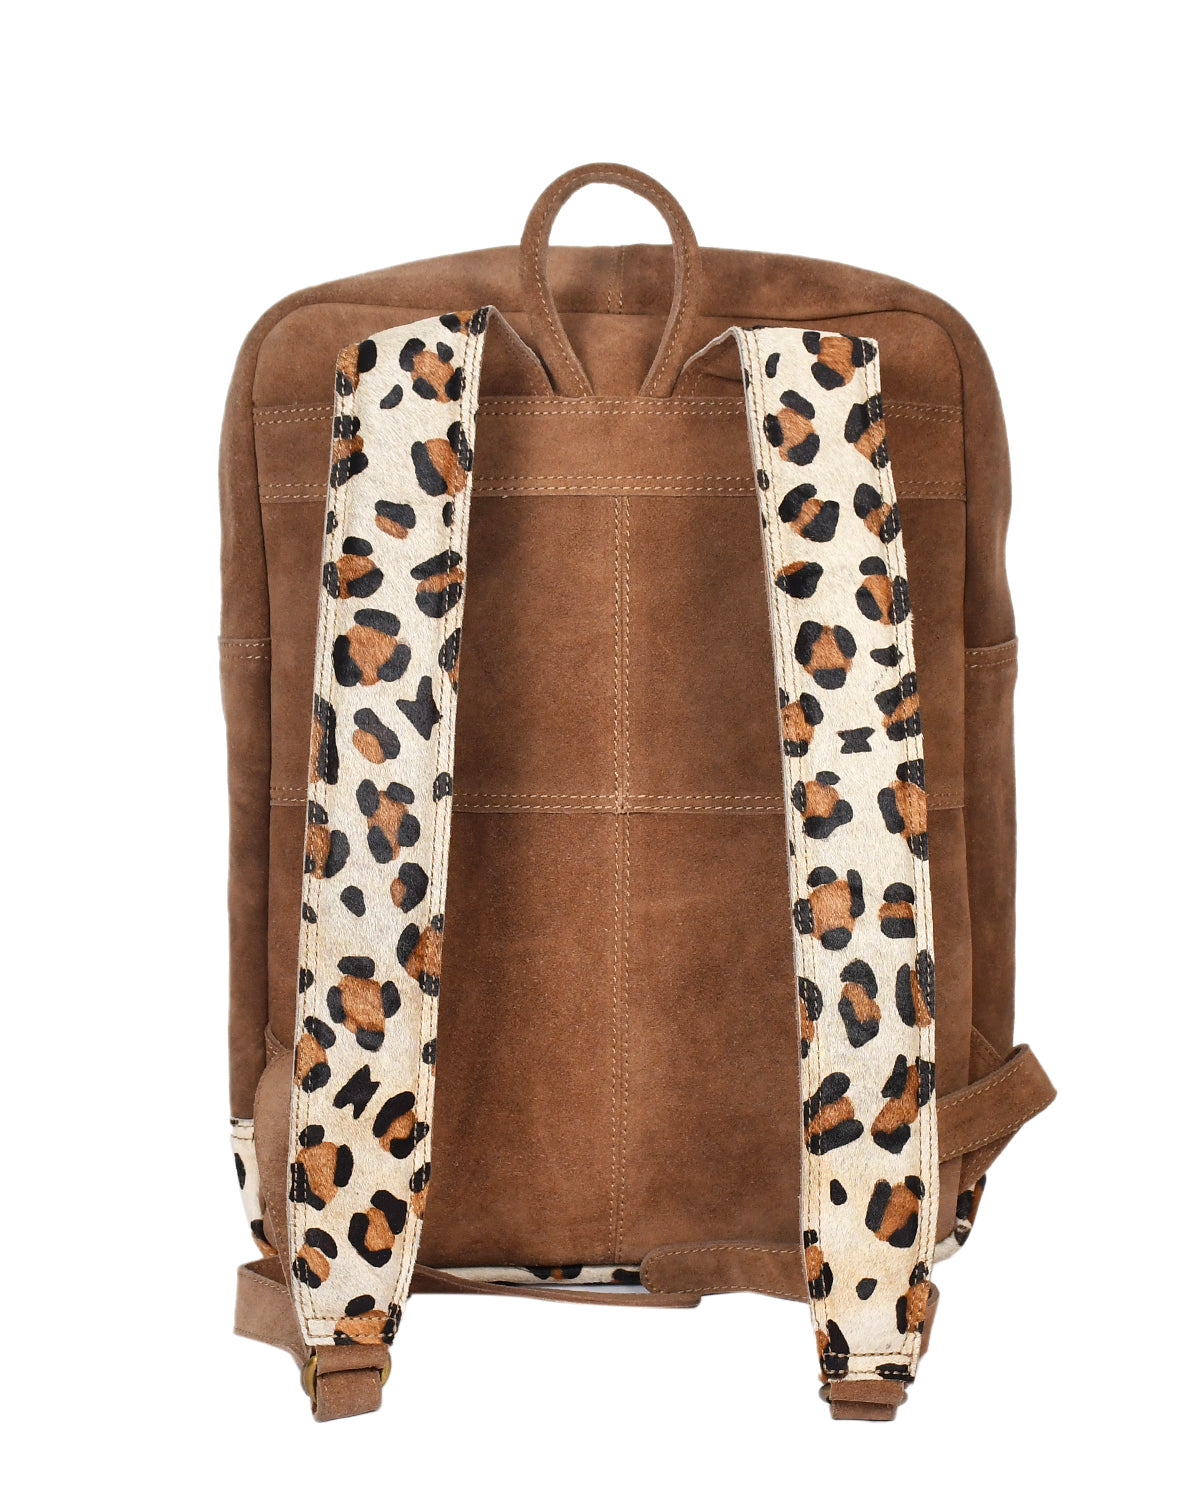 Celtic brown color suede leather with hair on leather backpack bag for office use with glorious look . - CELTICINDIA